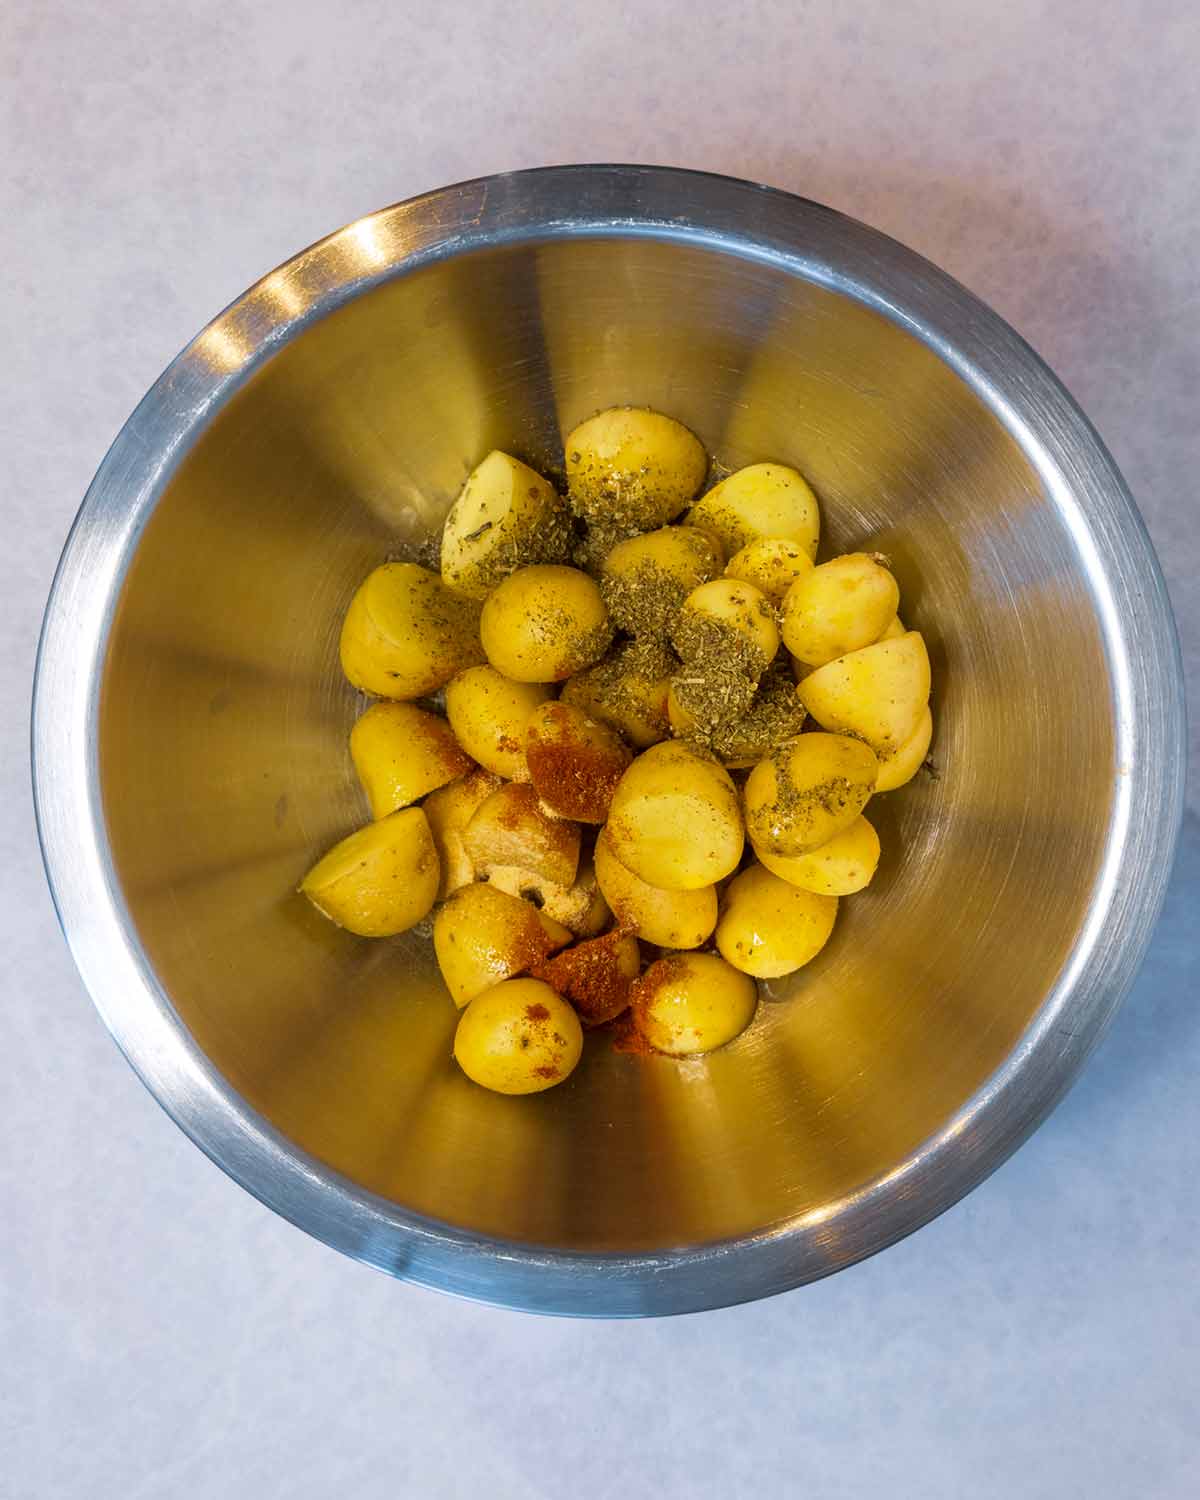 Baby potatoes in a bowl with oil, herbs and seasoning.